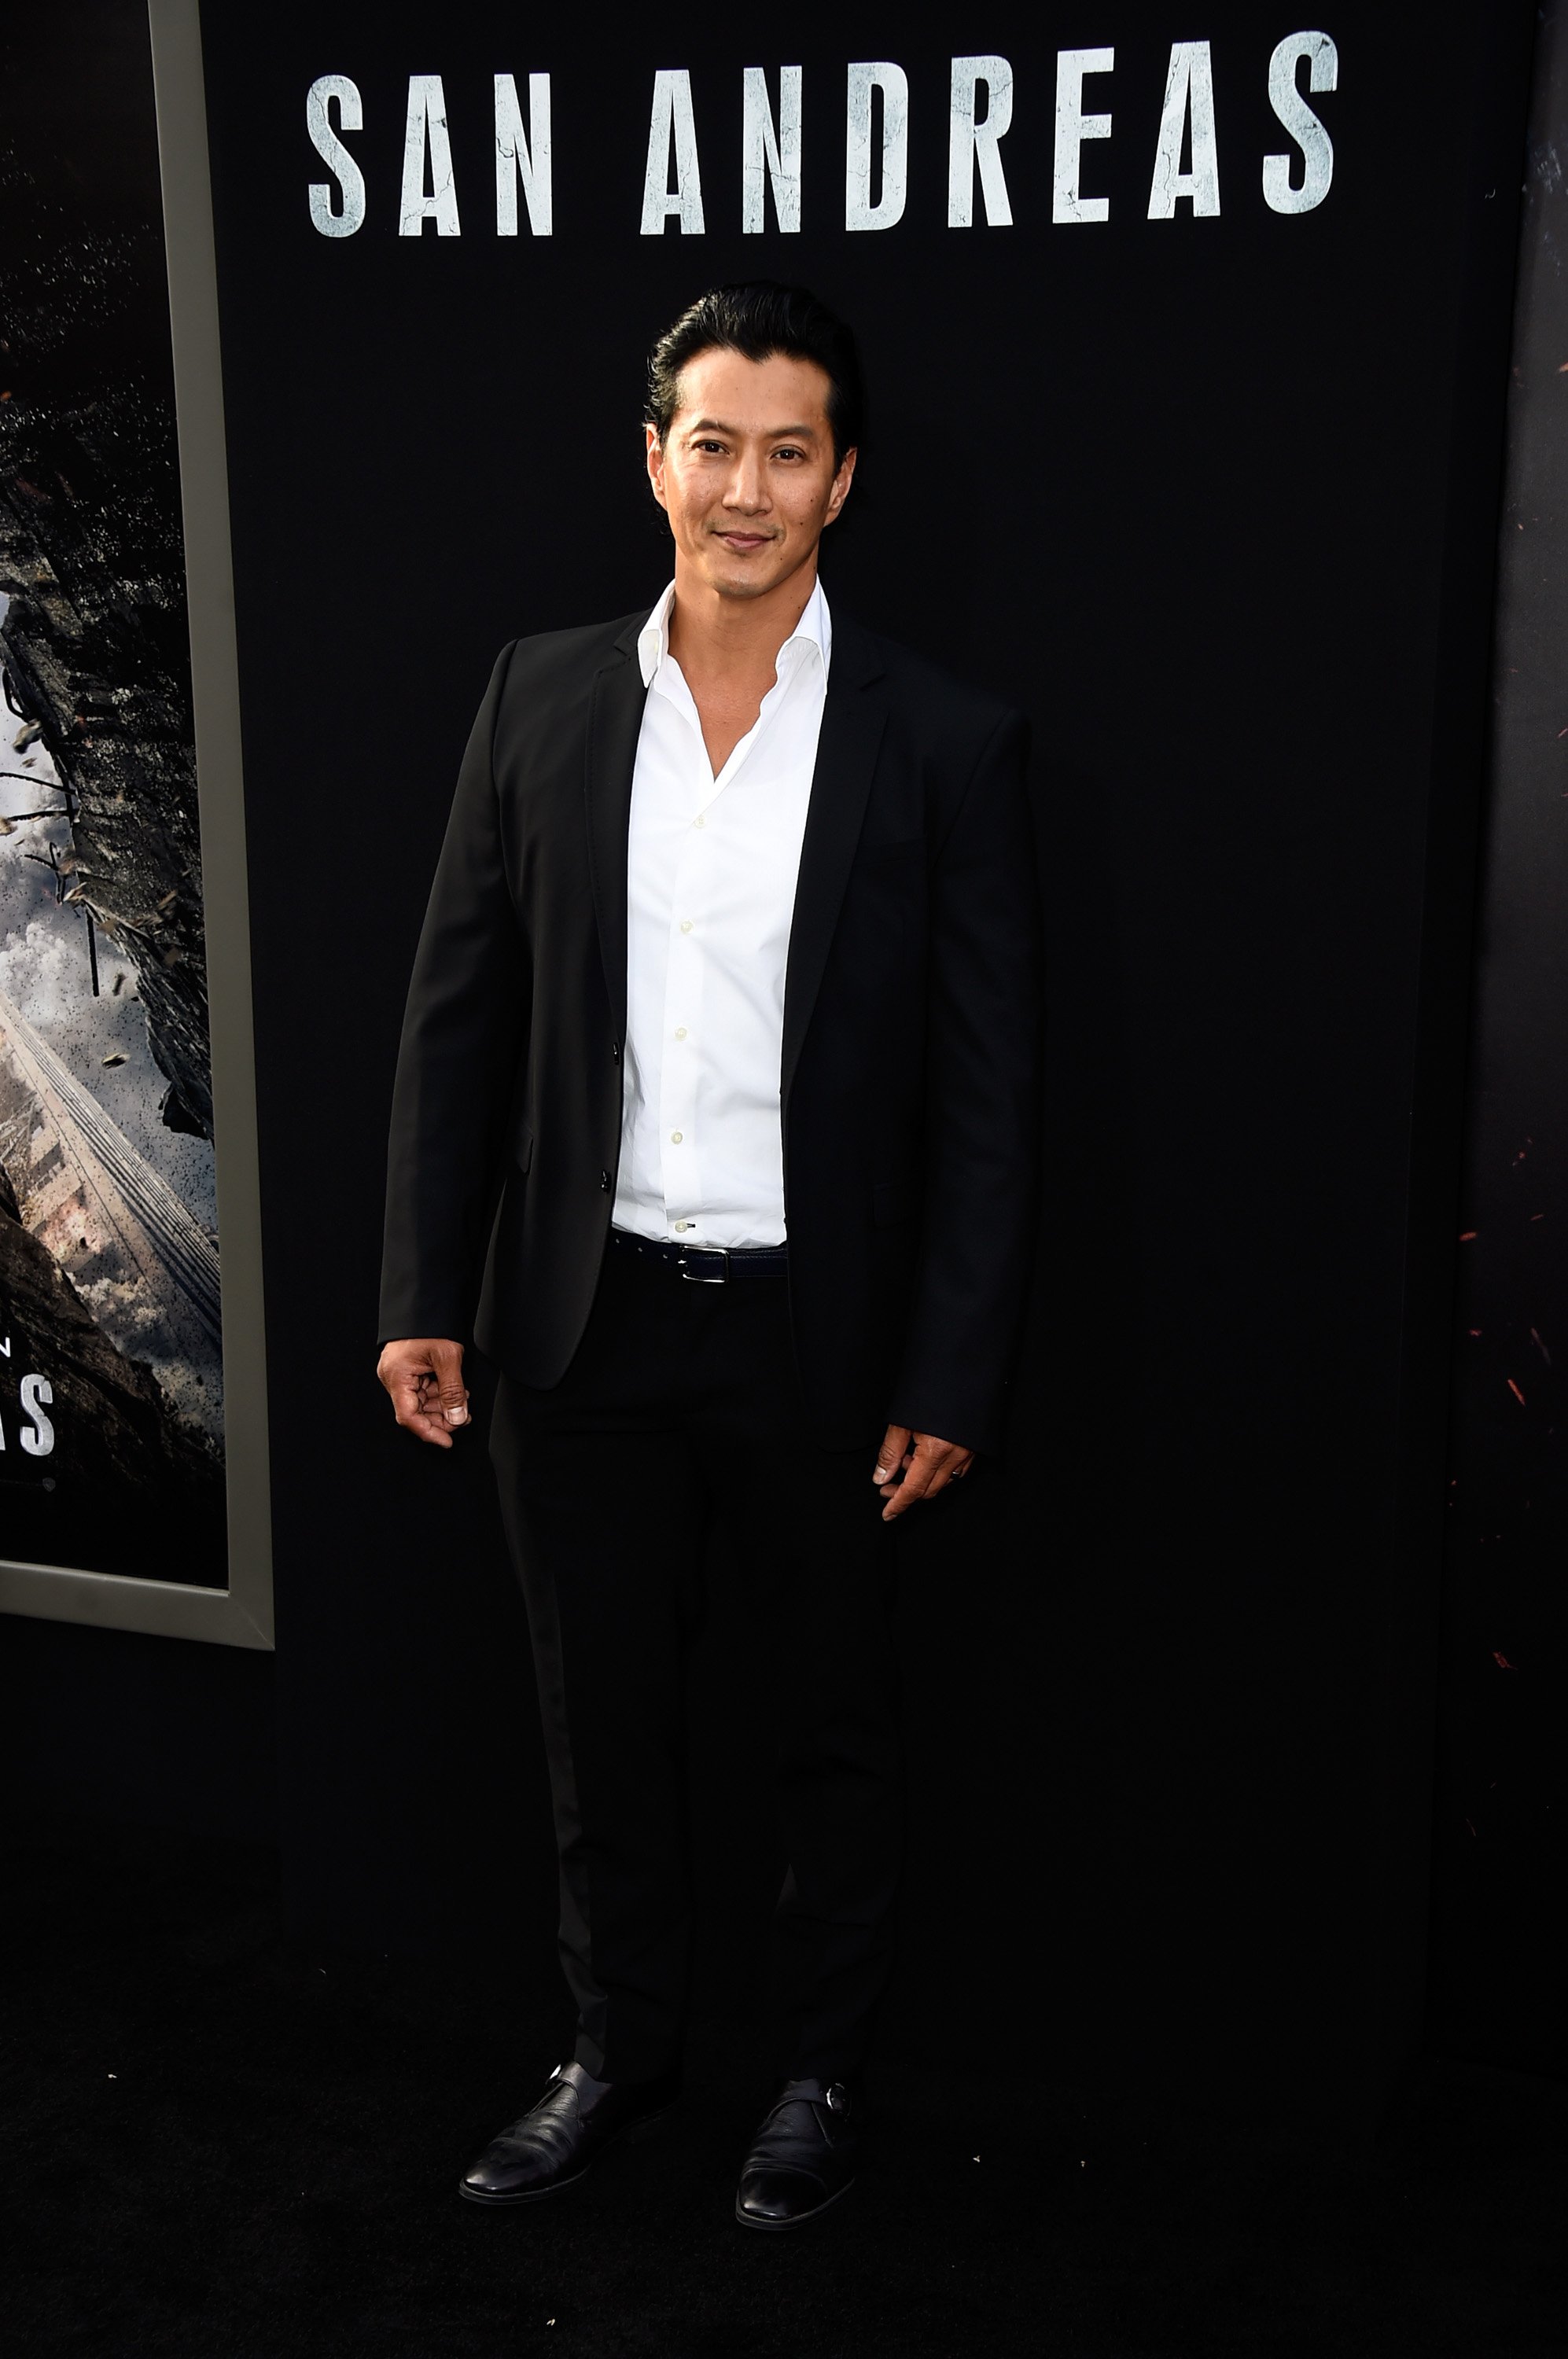 Will Yun Lee attends the premiere of "San Andreas" in 2015 | Photo: Getty Images